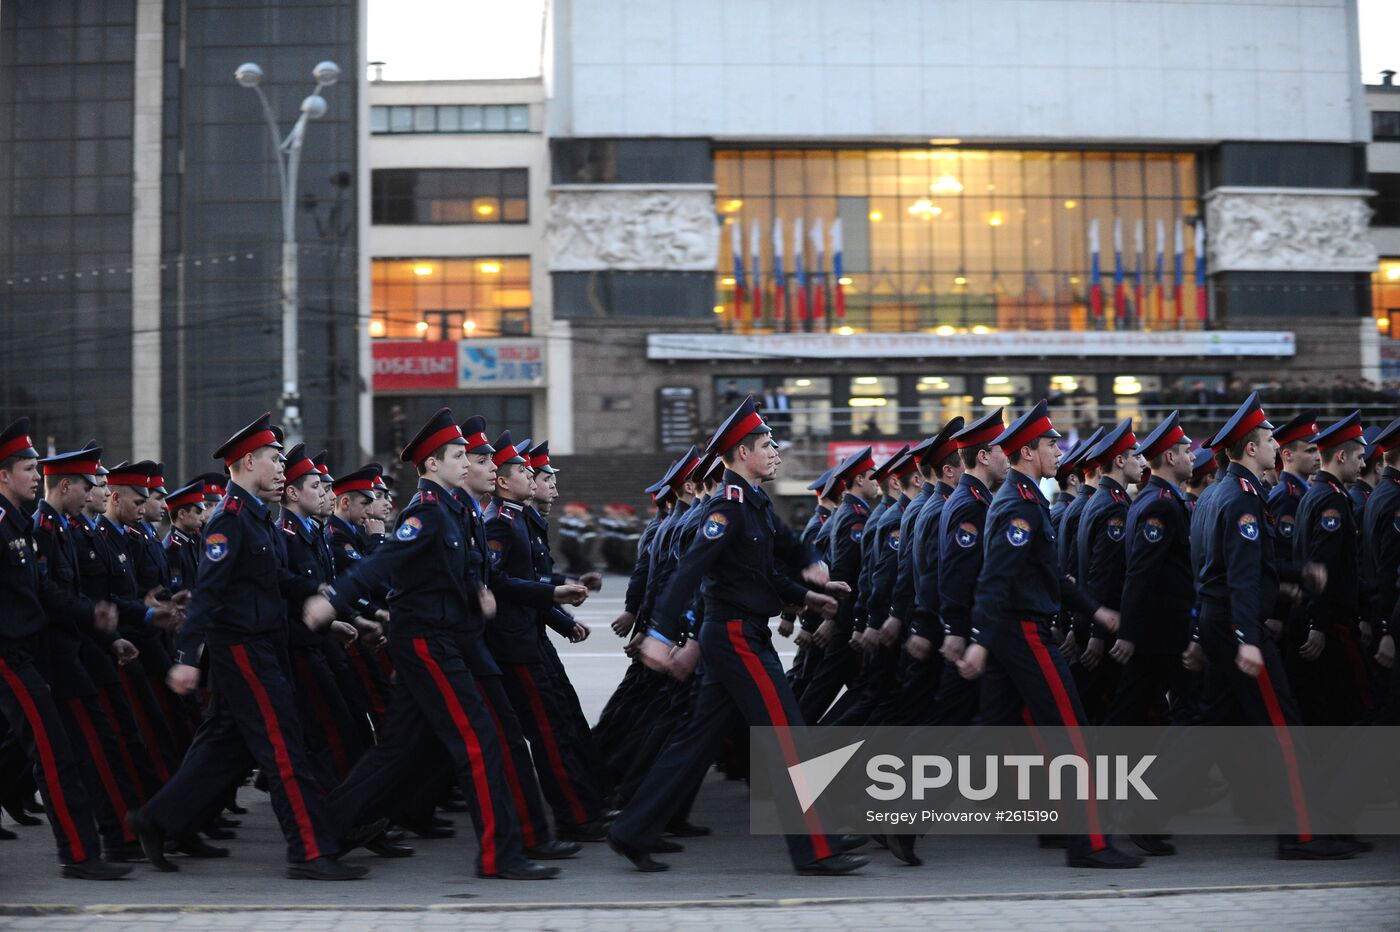 Victory Parade rehearsal in Rostov-on-Don